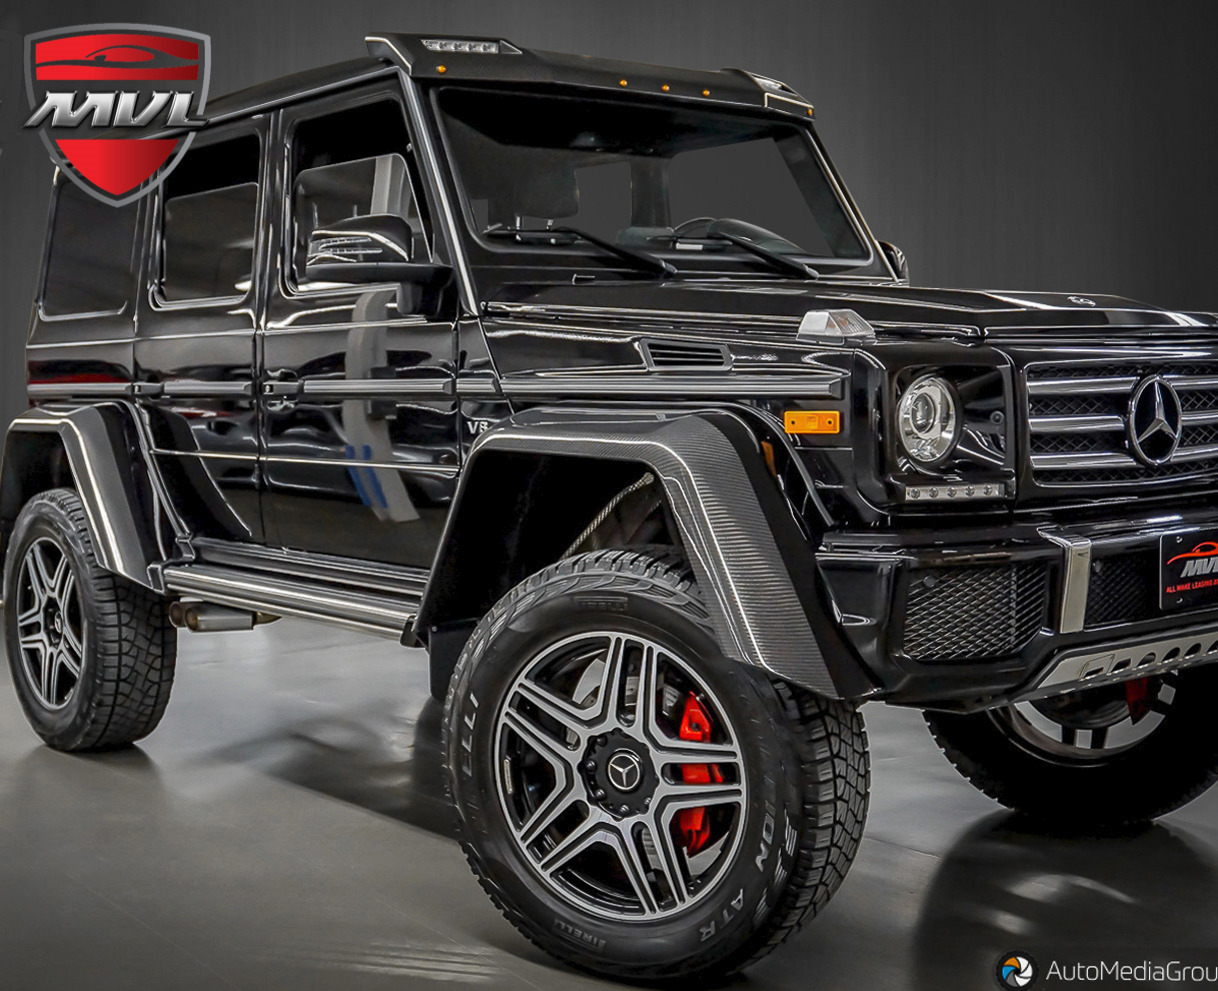 2018 Mercedes-Benz G-Class -SPECIAL LEASE RATE 7.49%- NO LUX TAX, G550 4x4 Sq